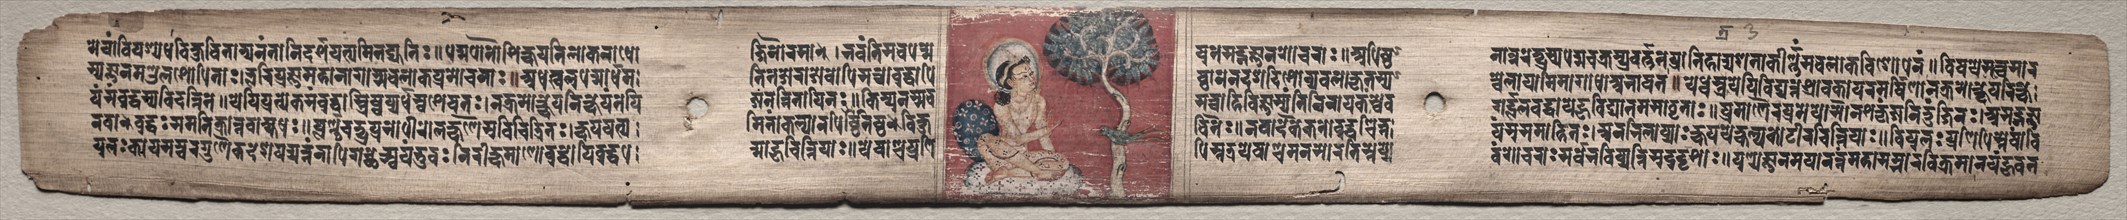 Leaf from Gandavyuha: Sudhana Addresses a Bird, from Chapter 1, Verse 47 (recto); Leaf from